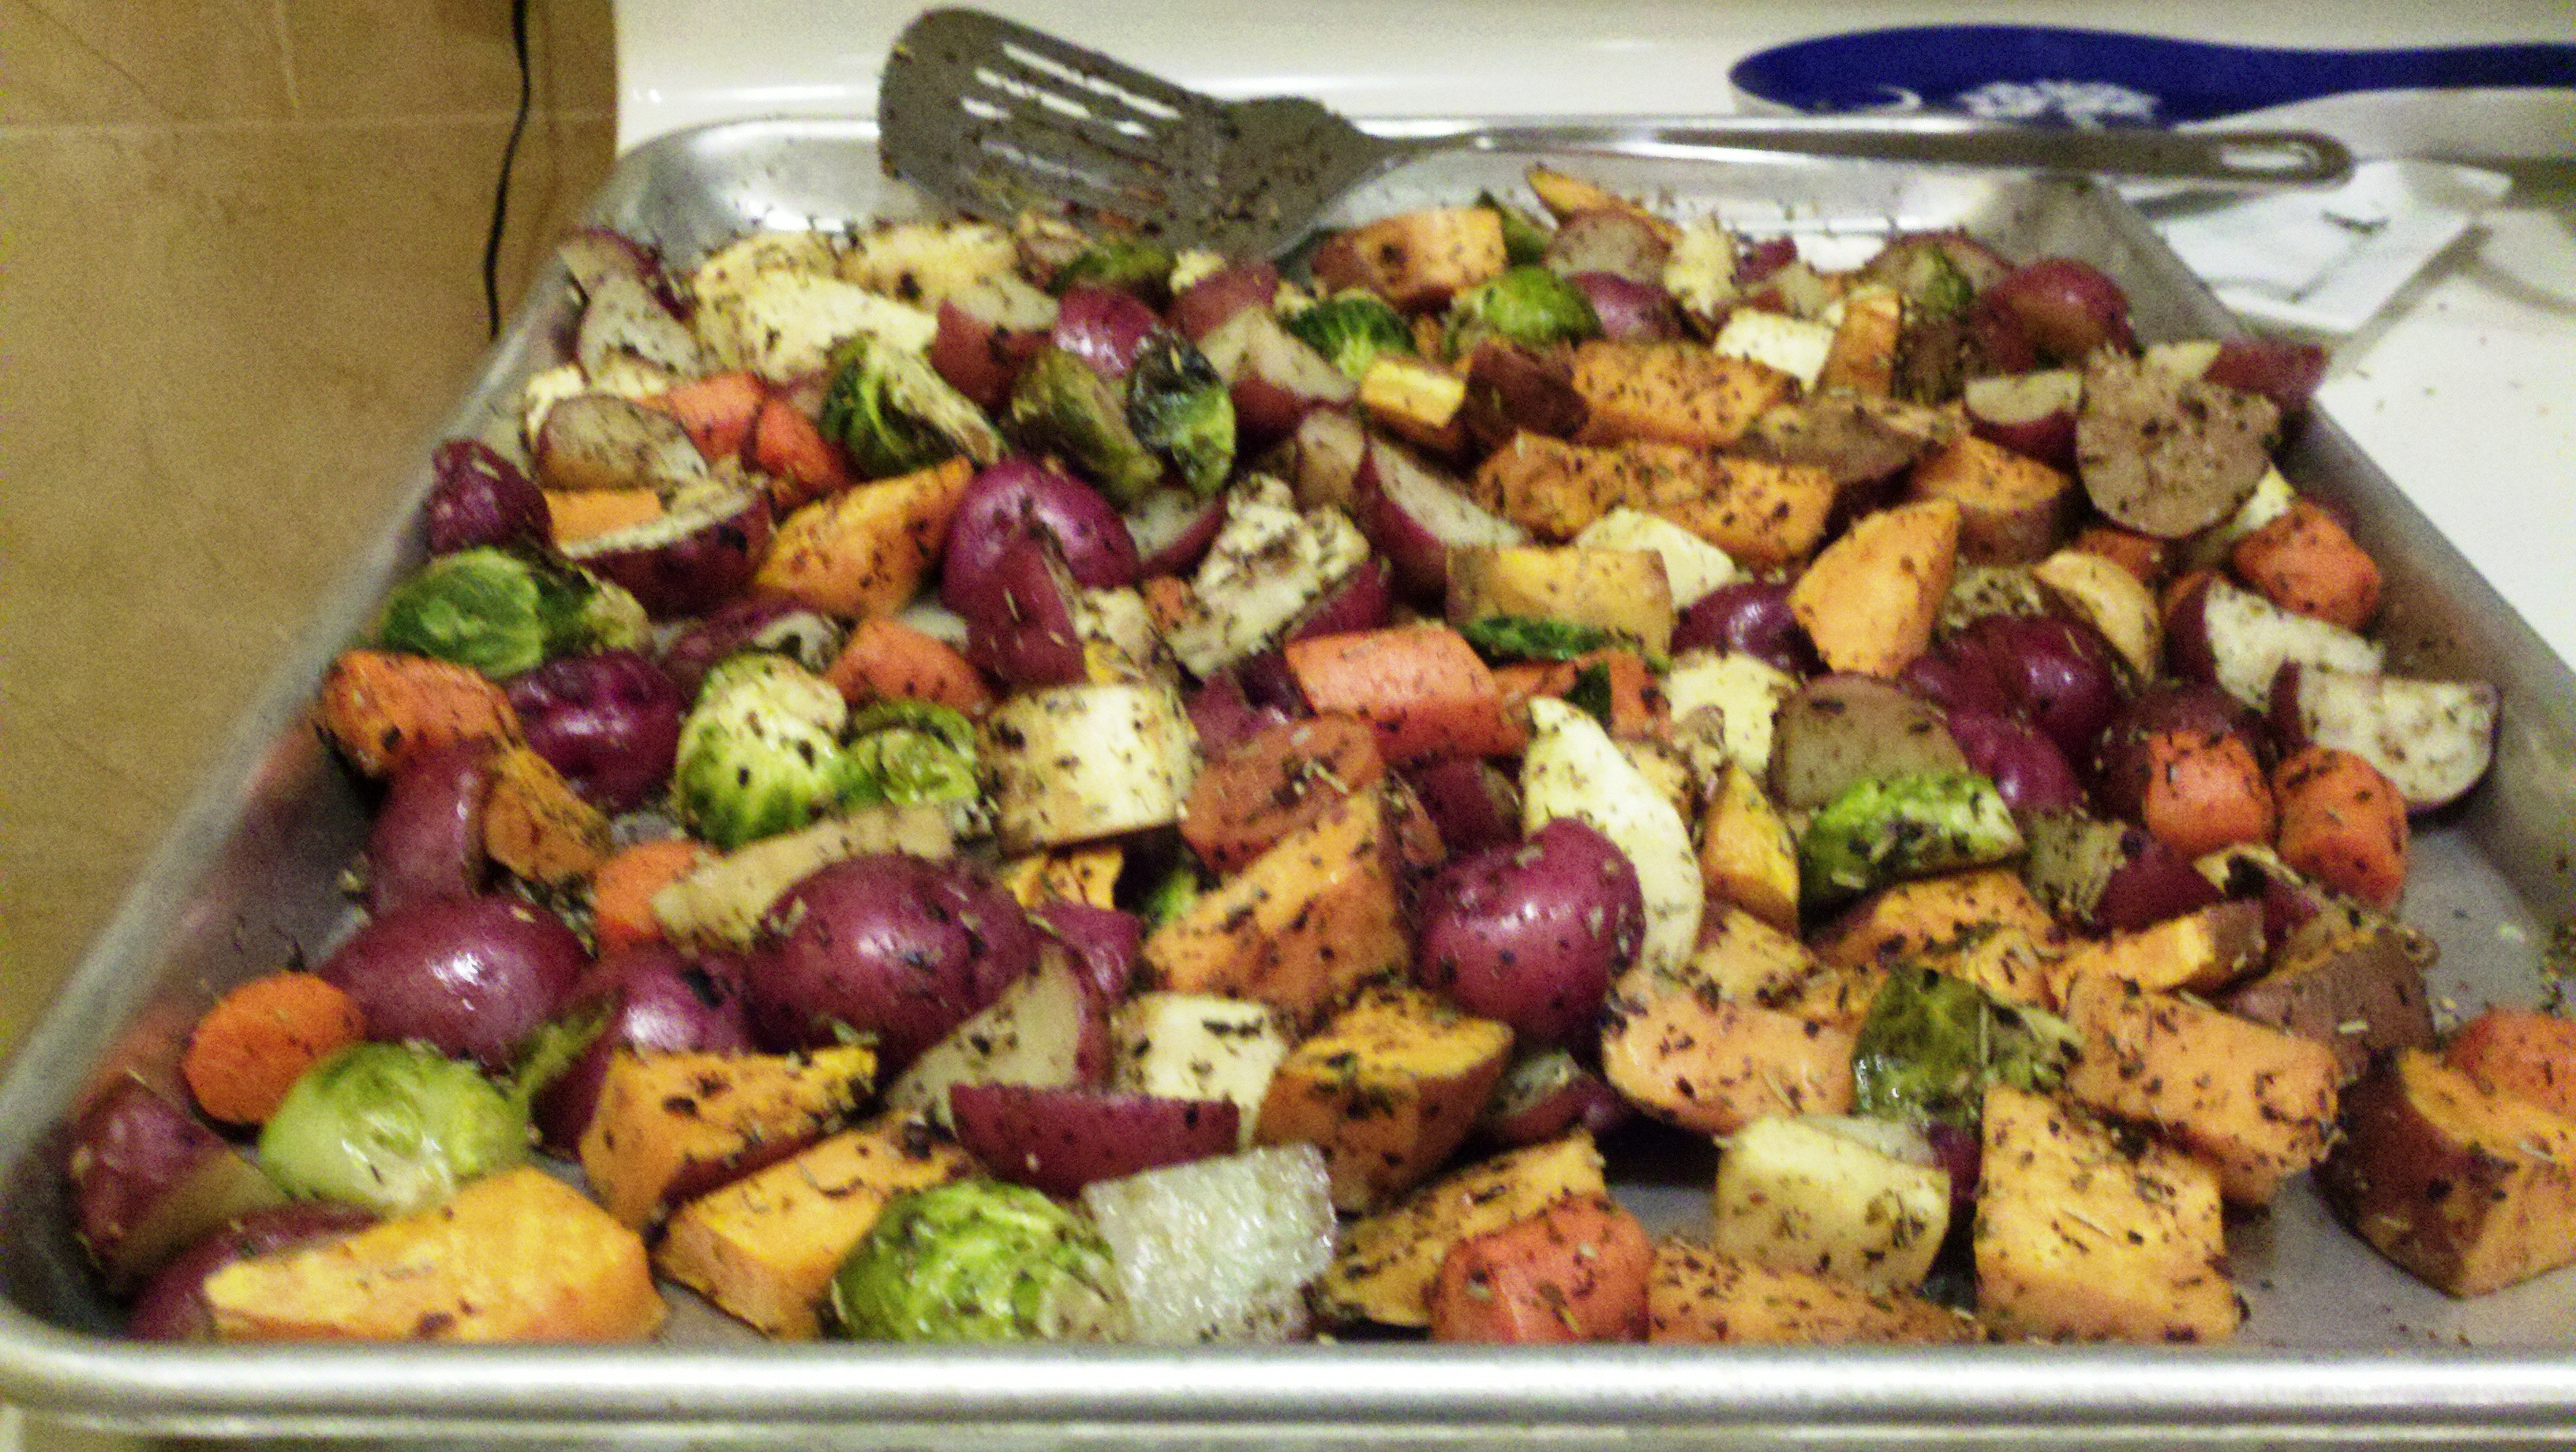 Roasted Vegetables Thanksgiving Recipe
 thanksgiving ve able recipes green beans